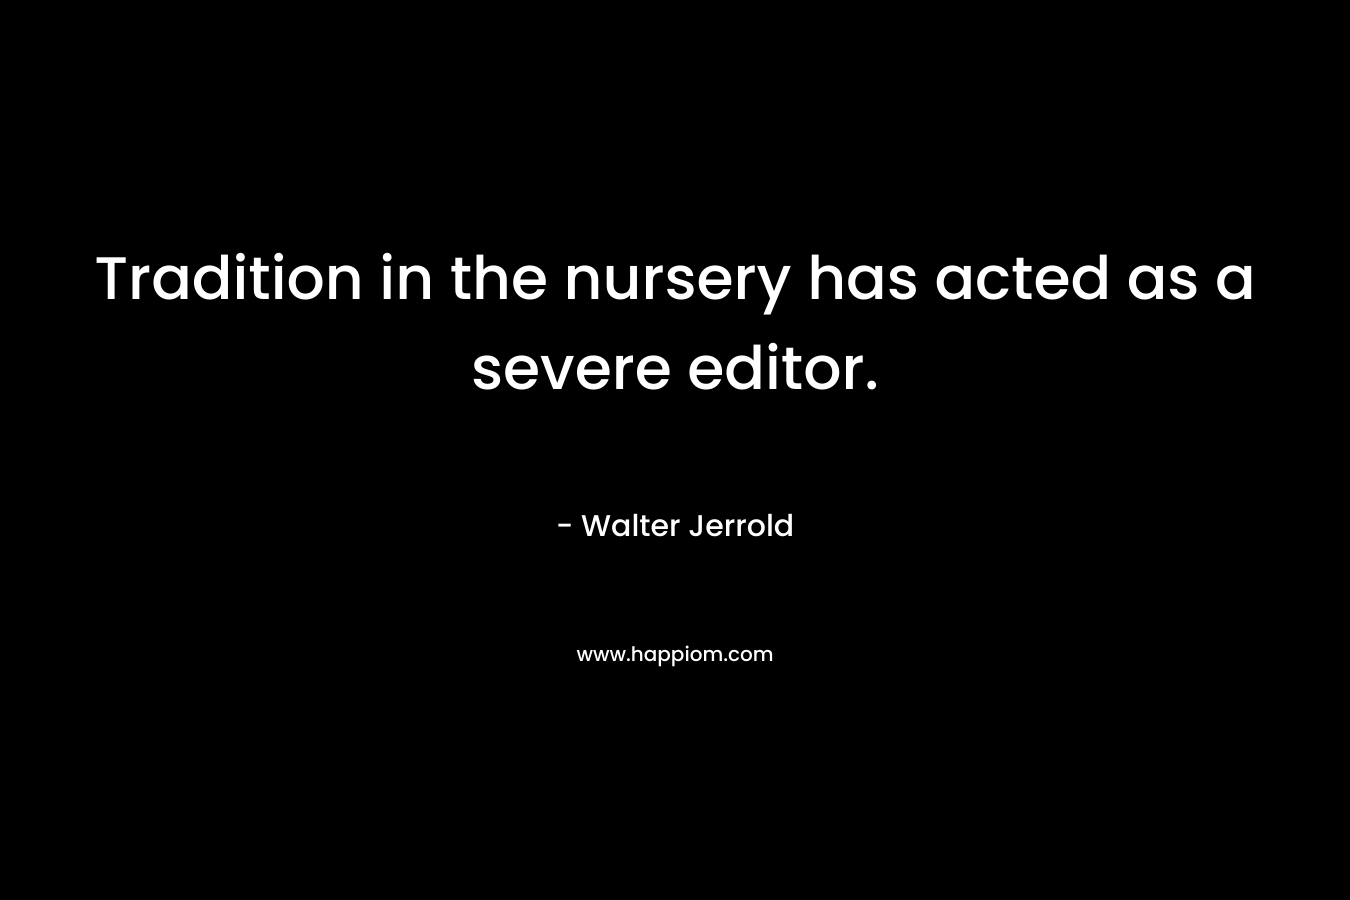 Tradition in the nursery has acted as a severe editor. – Walter Jerrold